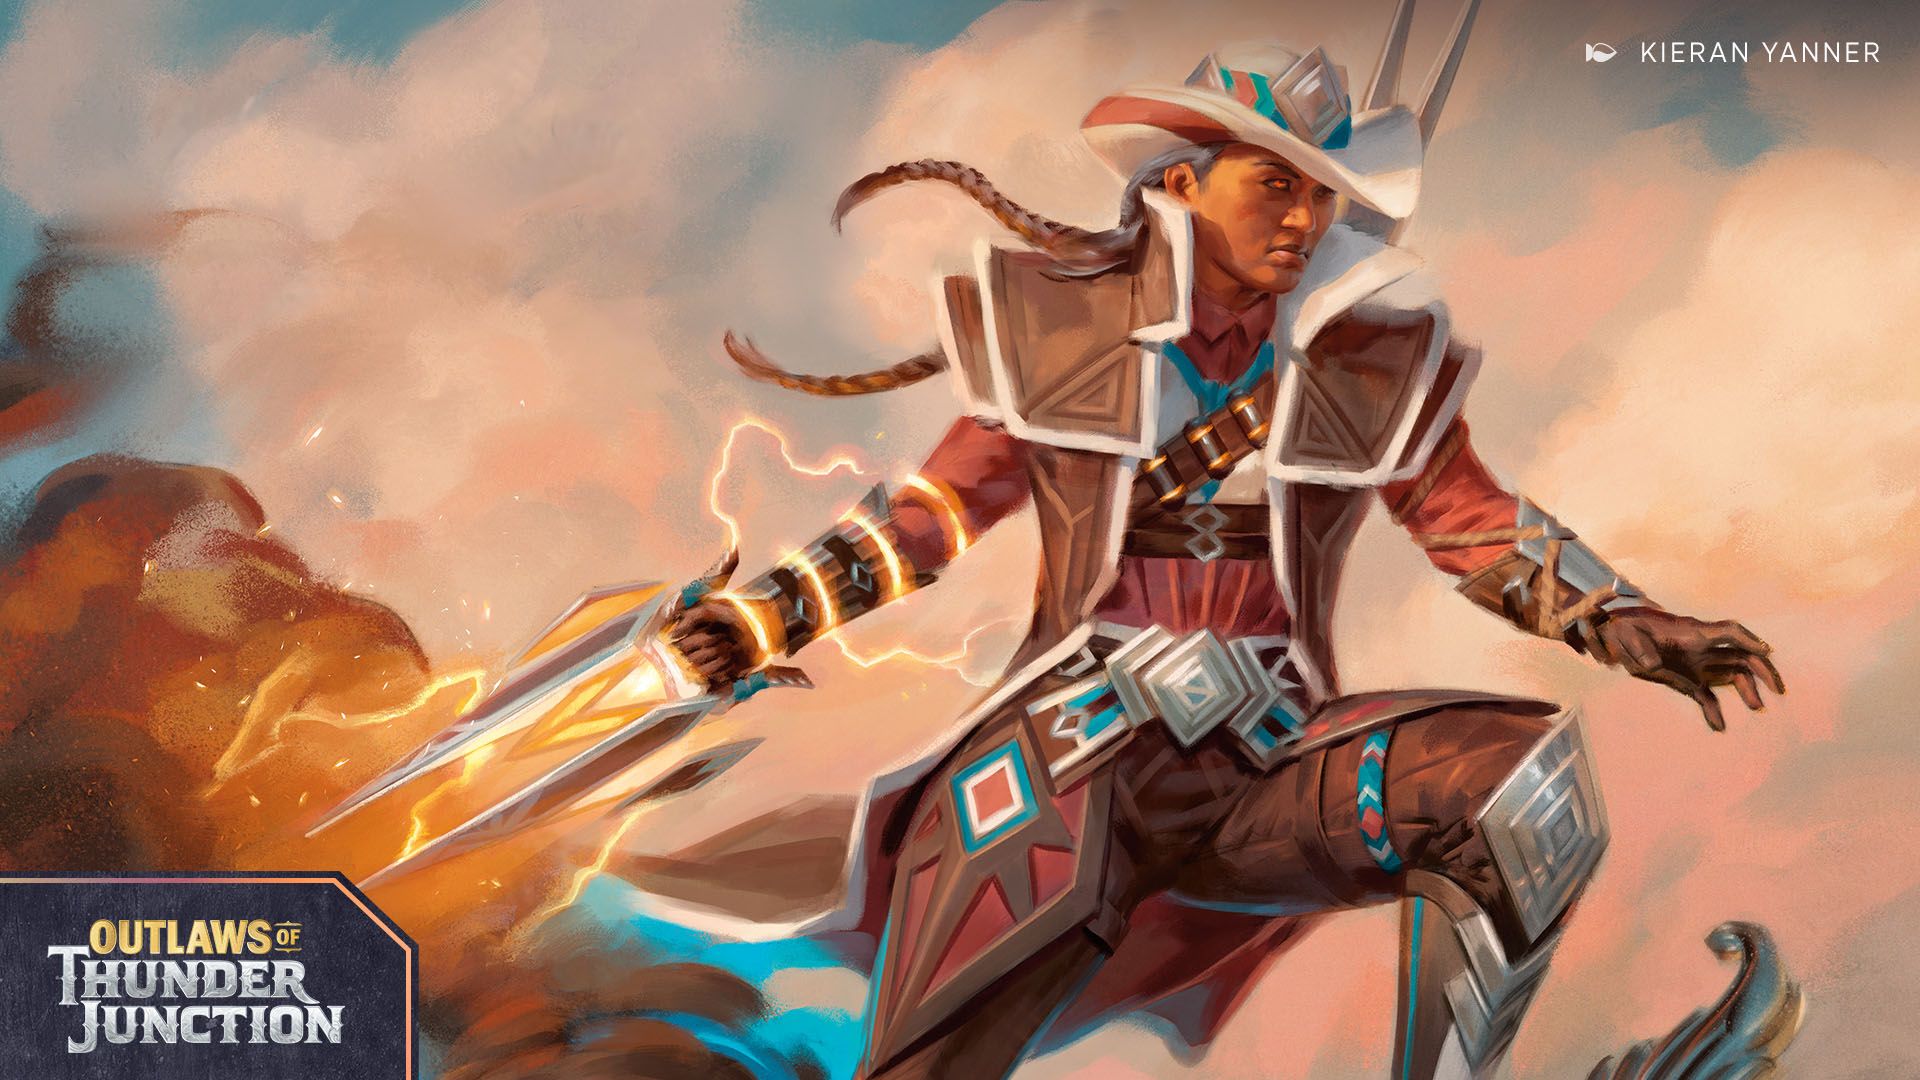 Magic The Gathering Reveals The Wild WestThemed Outaws Of Thunder